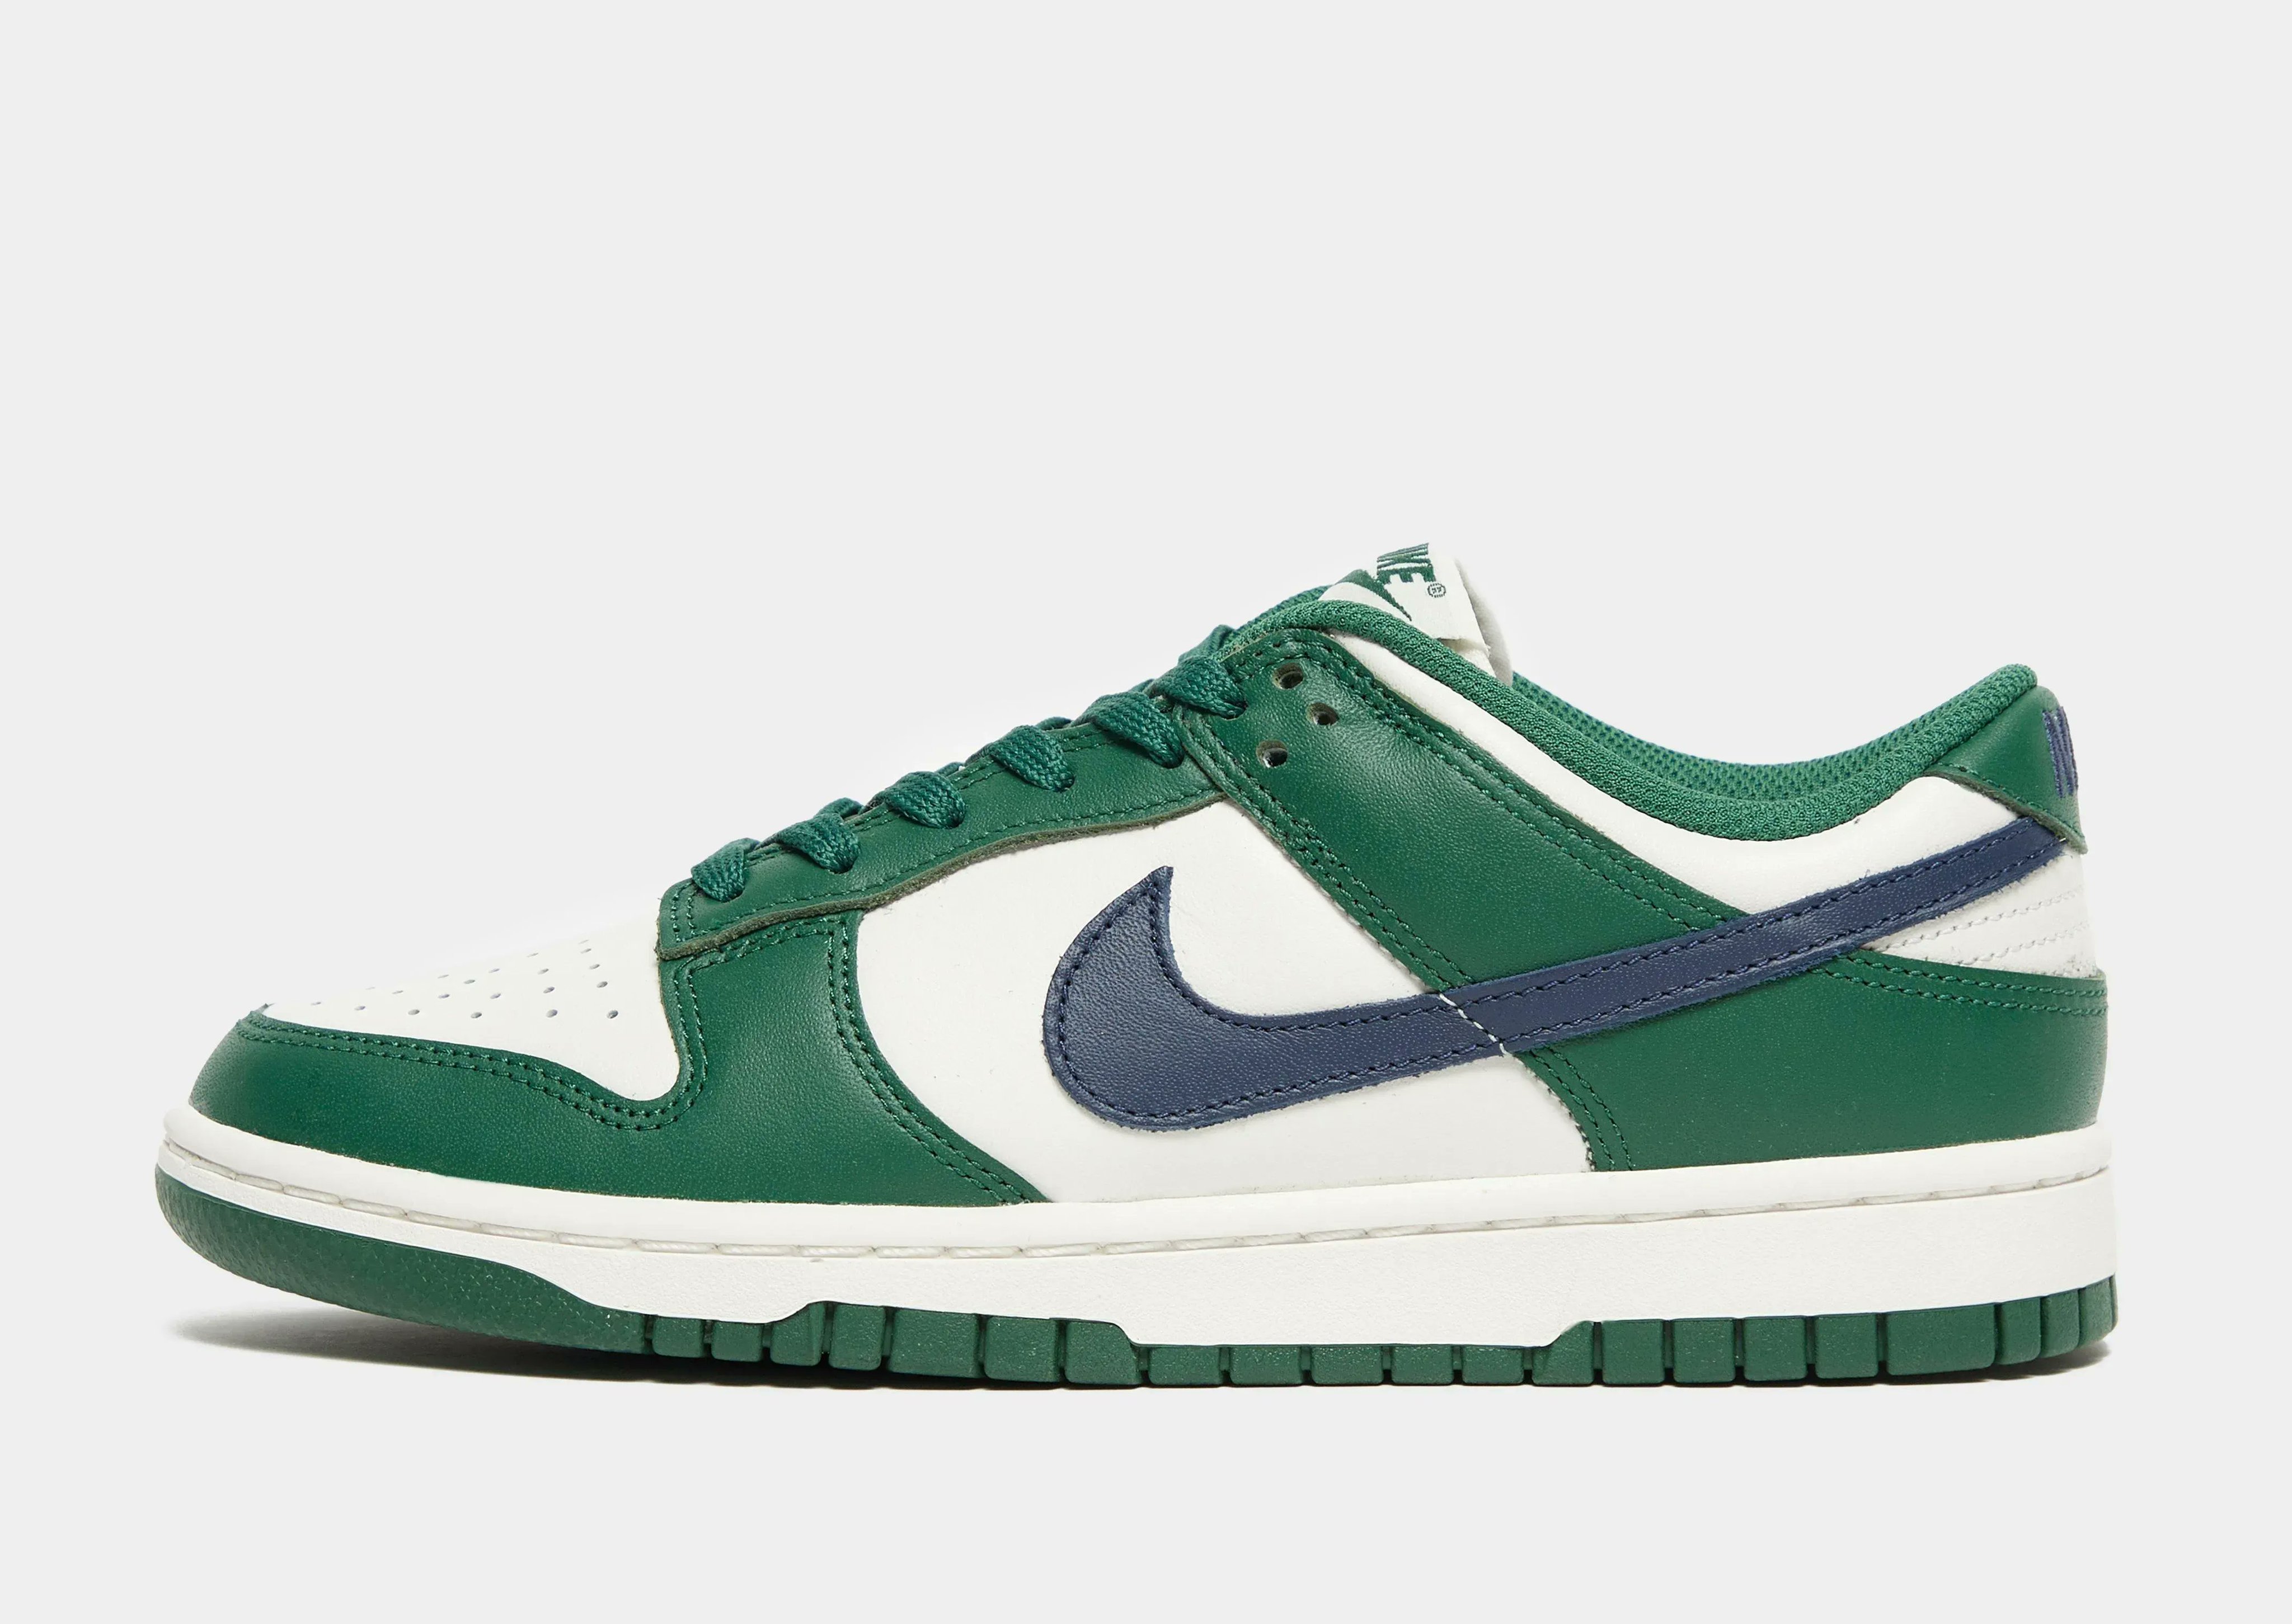 Nike Air Force 1' 07 OG Green Gucci Illusion Low Dunk Sneakers | Kaiglo  Nigeria